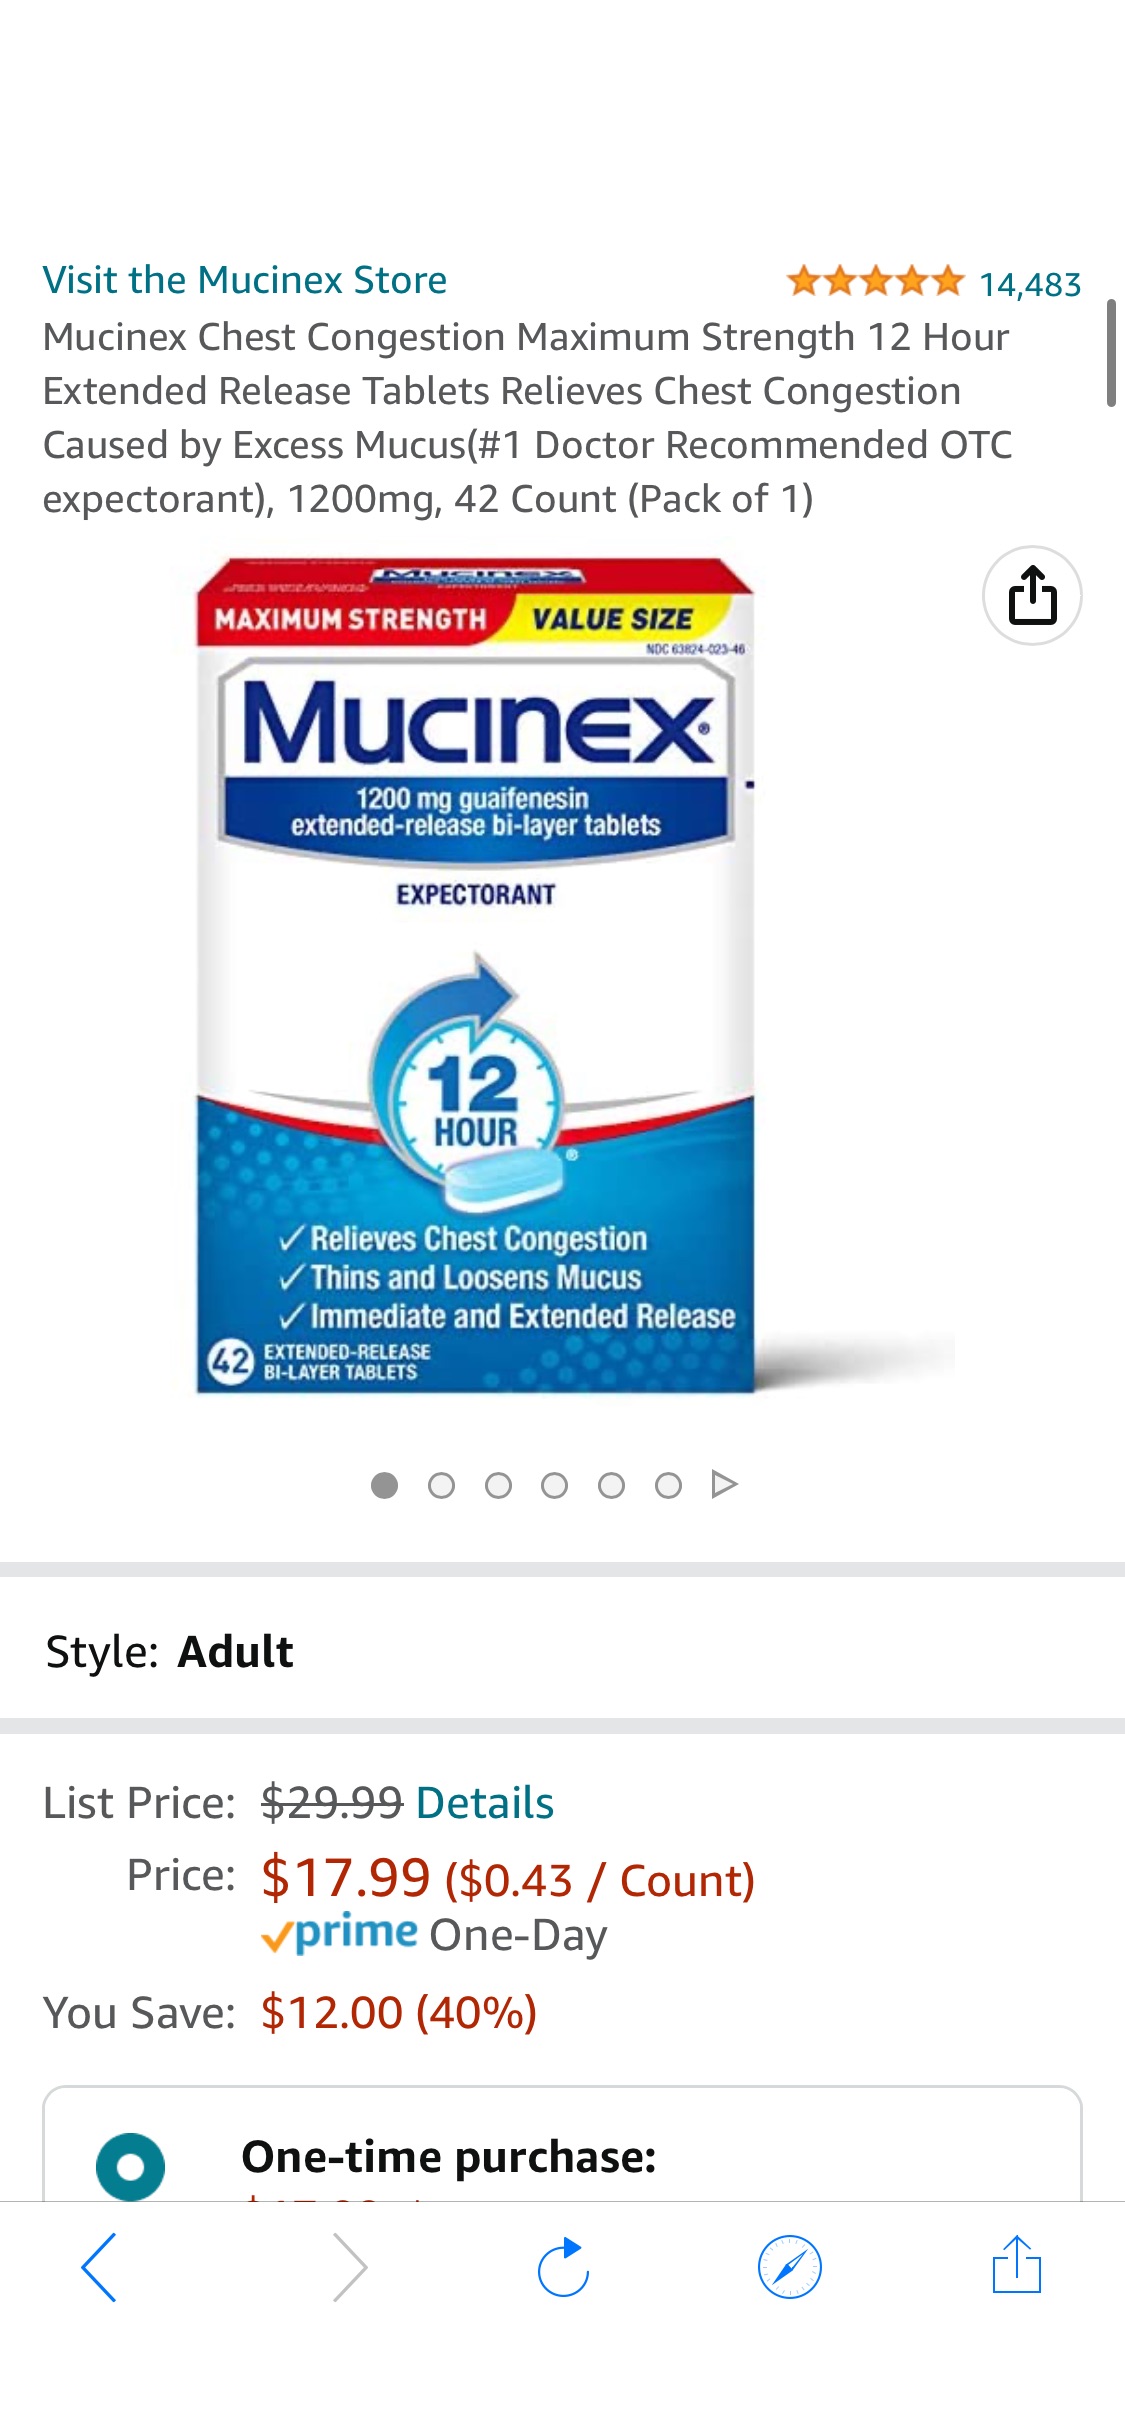 Mucinex Chest Congestion Maximum Strength 12 Hour Extended Release Tablets Relieves Chest Congestion Caused by Excess Mucus(#1 Doctor Recommended OTC expectorant), 1200mg, 42 Count (Pack of 1) :感冒药